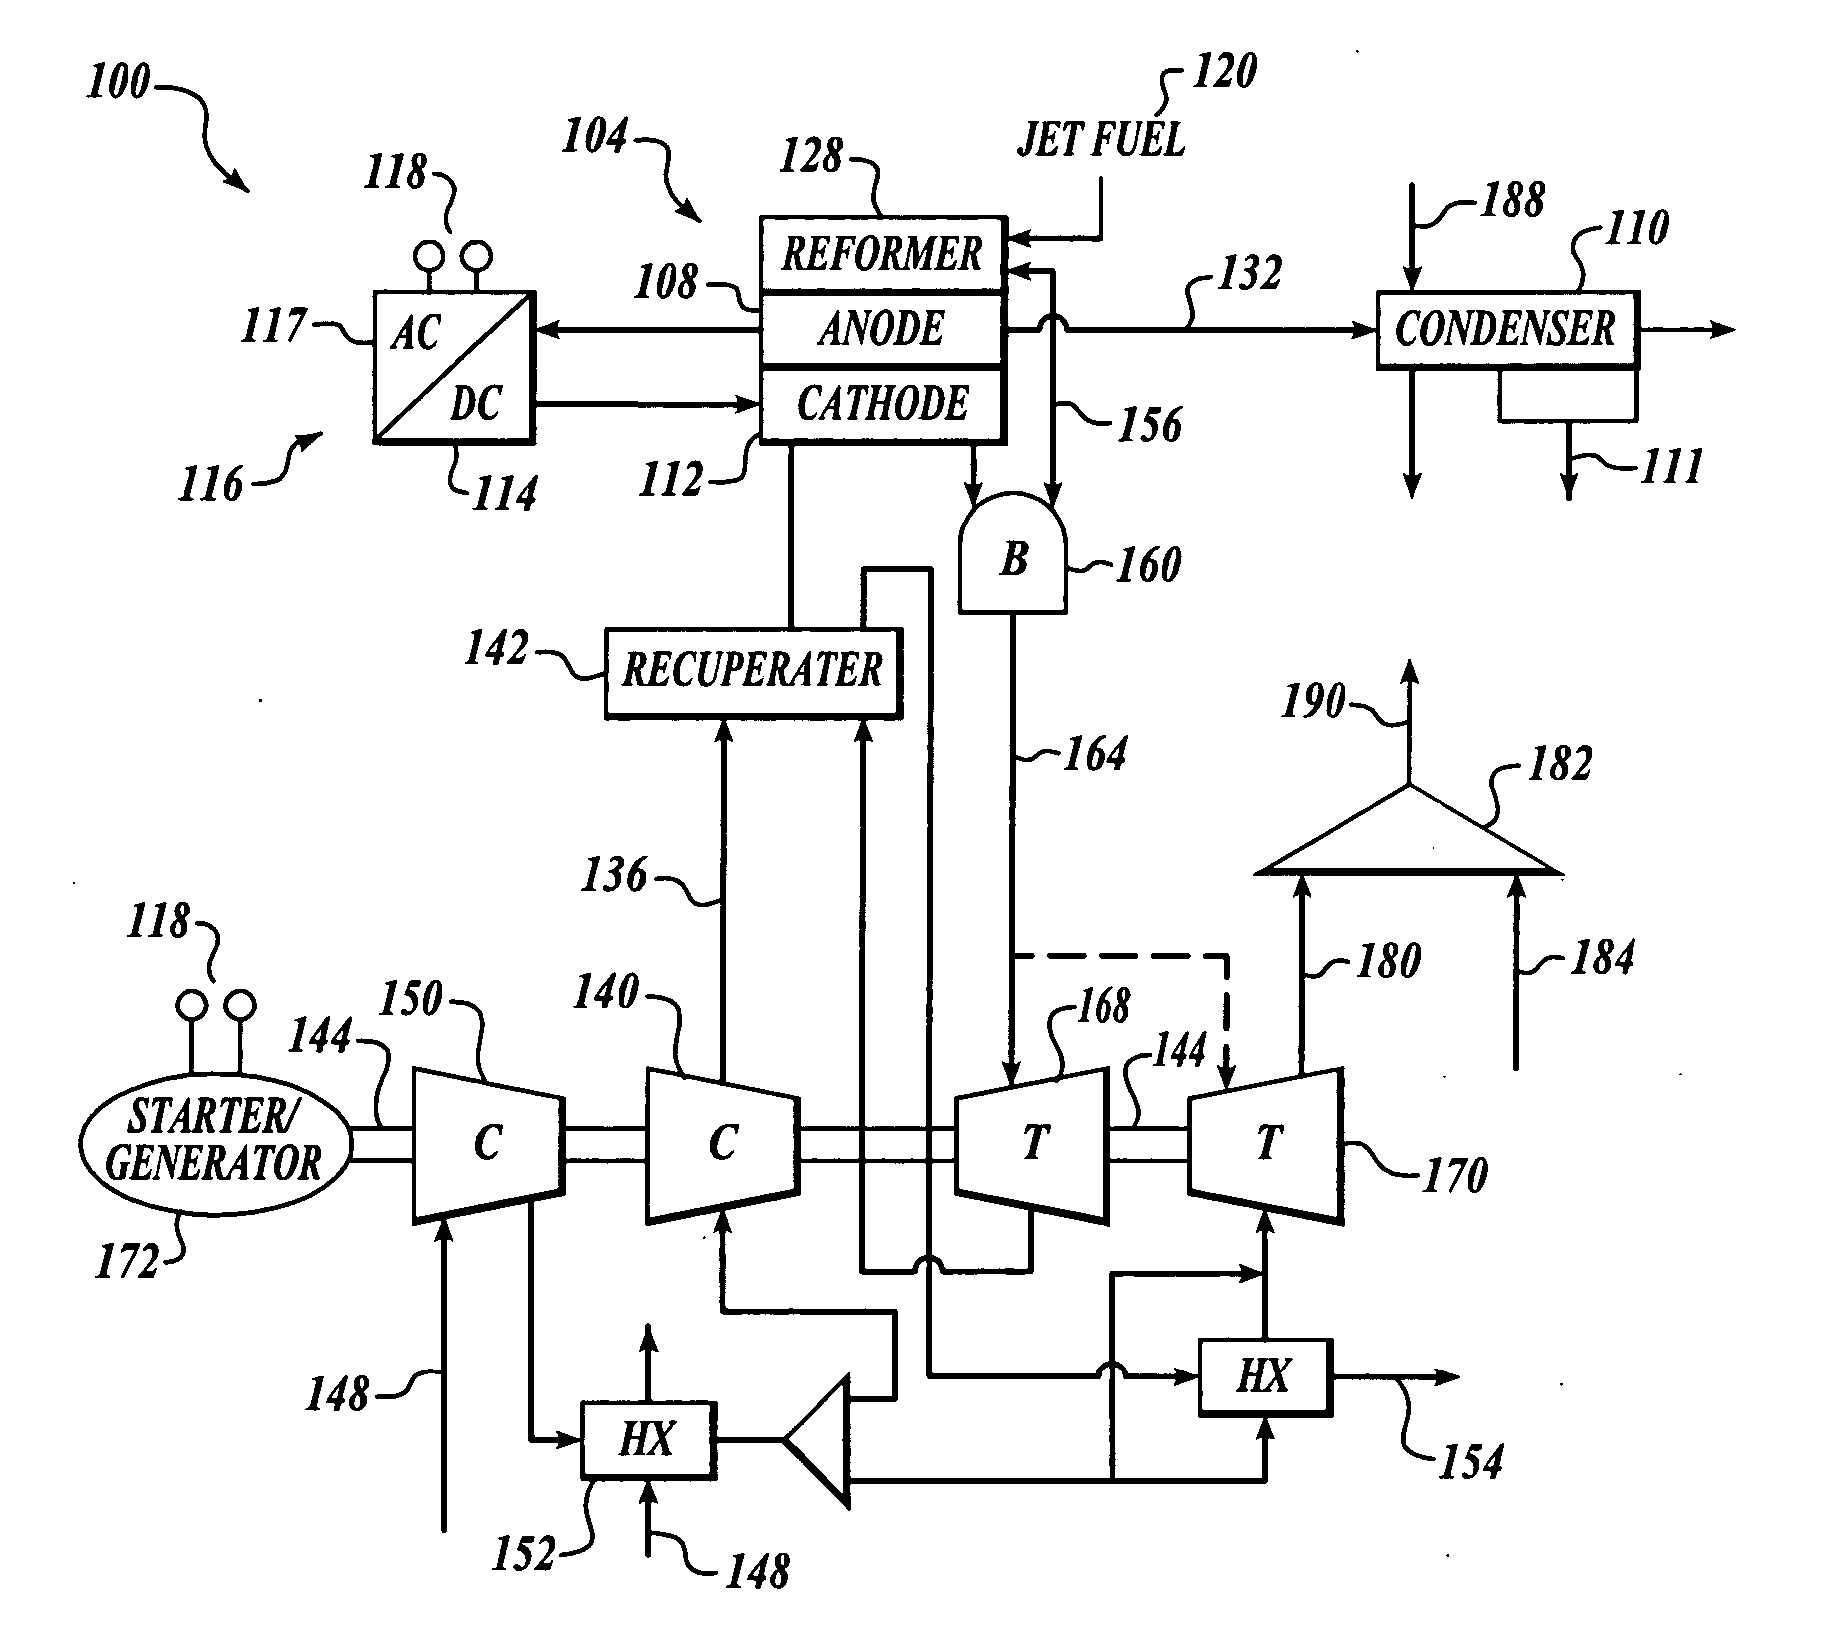 Combined fuel cell aircraft auxiliary power unit and environmental control system